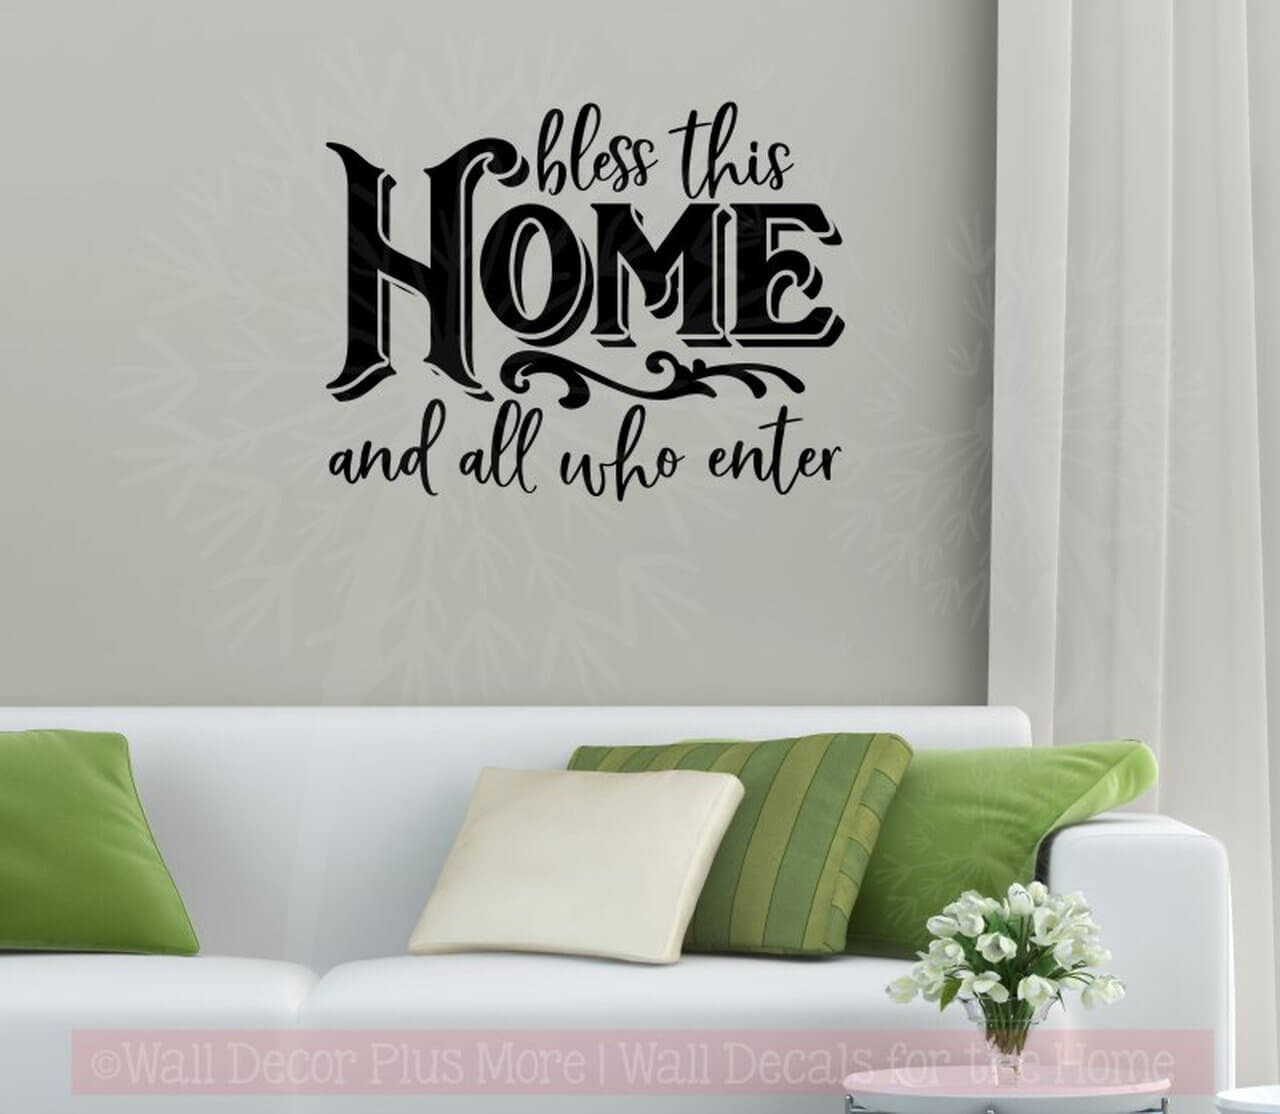 wall decals